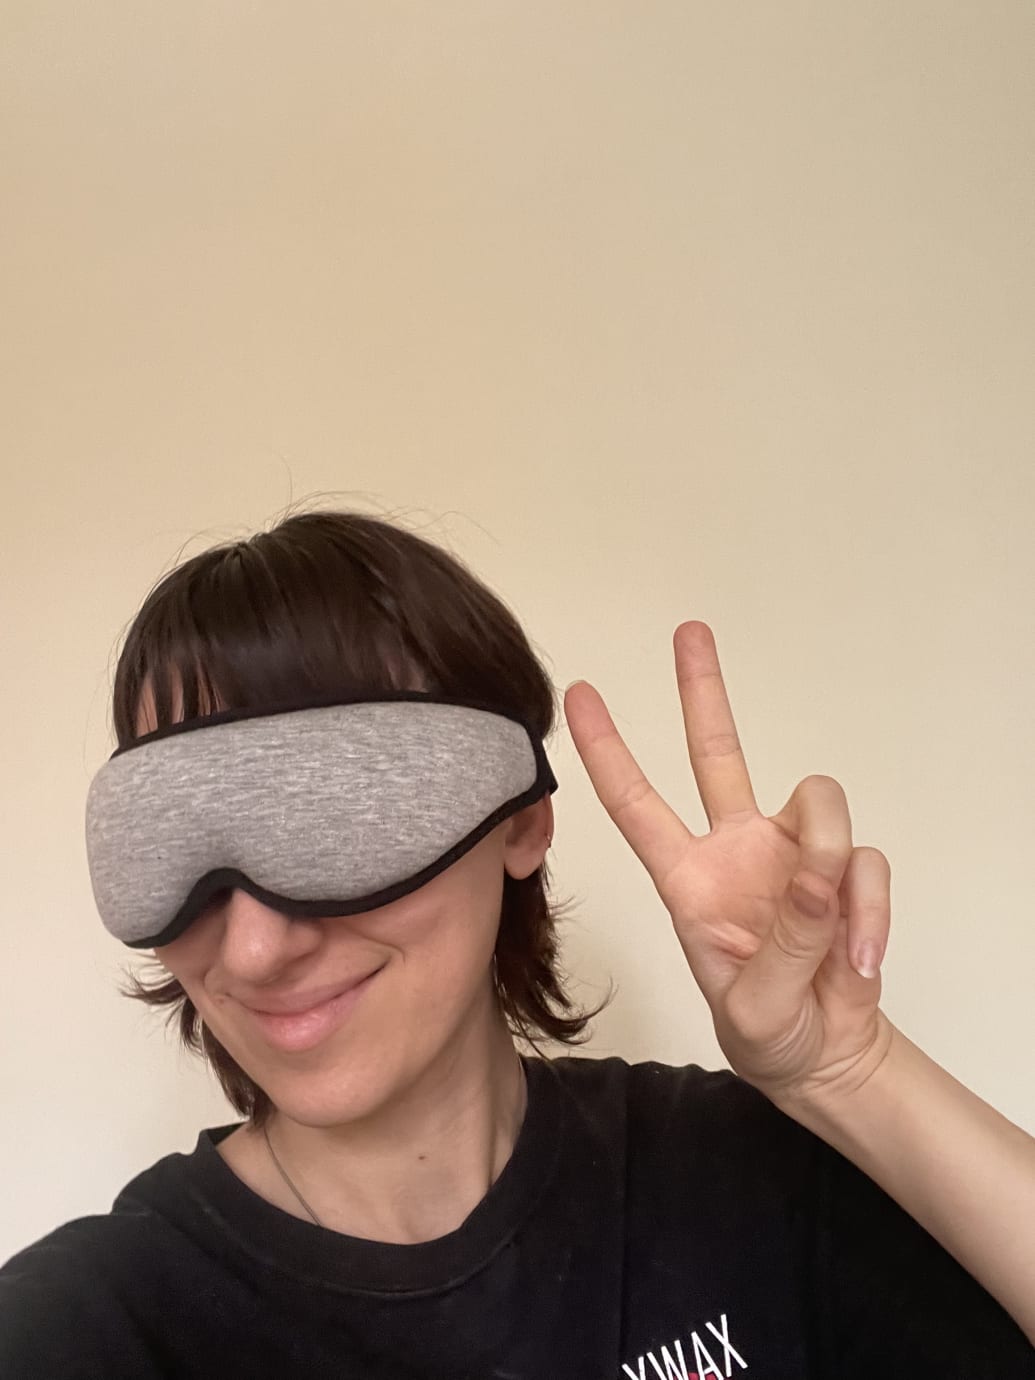 Ostrichpillow Eye Mask Review | Scouted, The Daily Beast